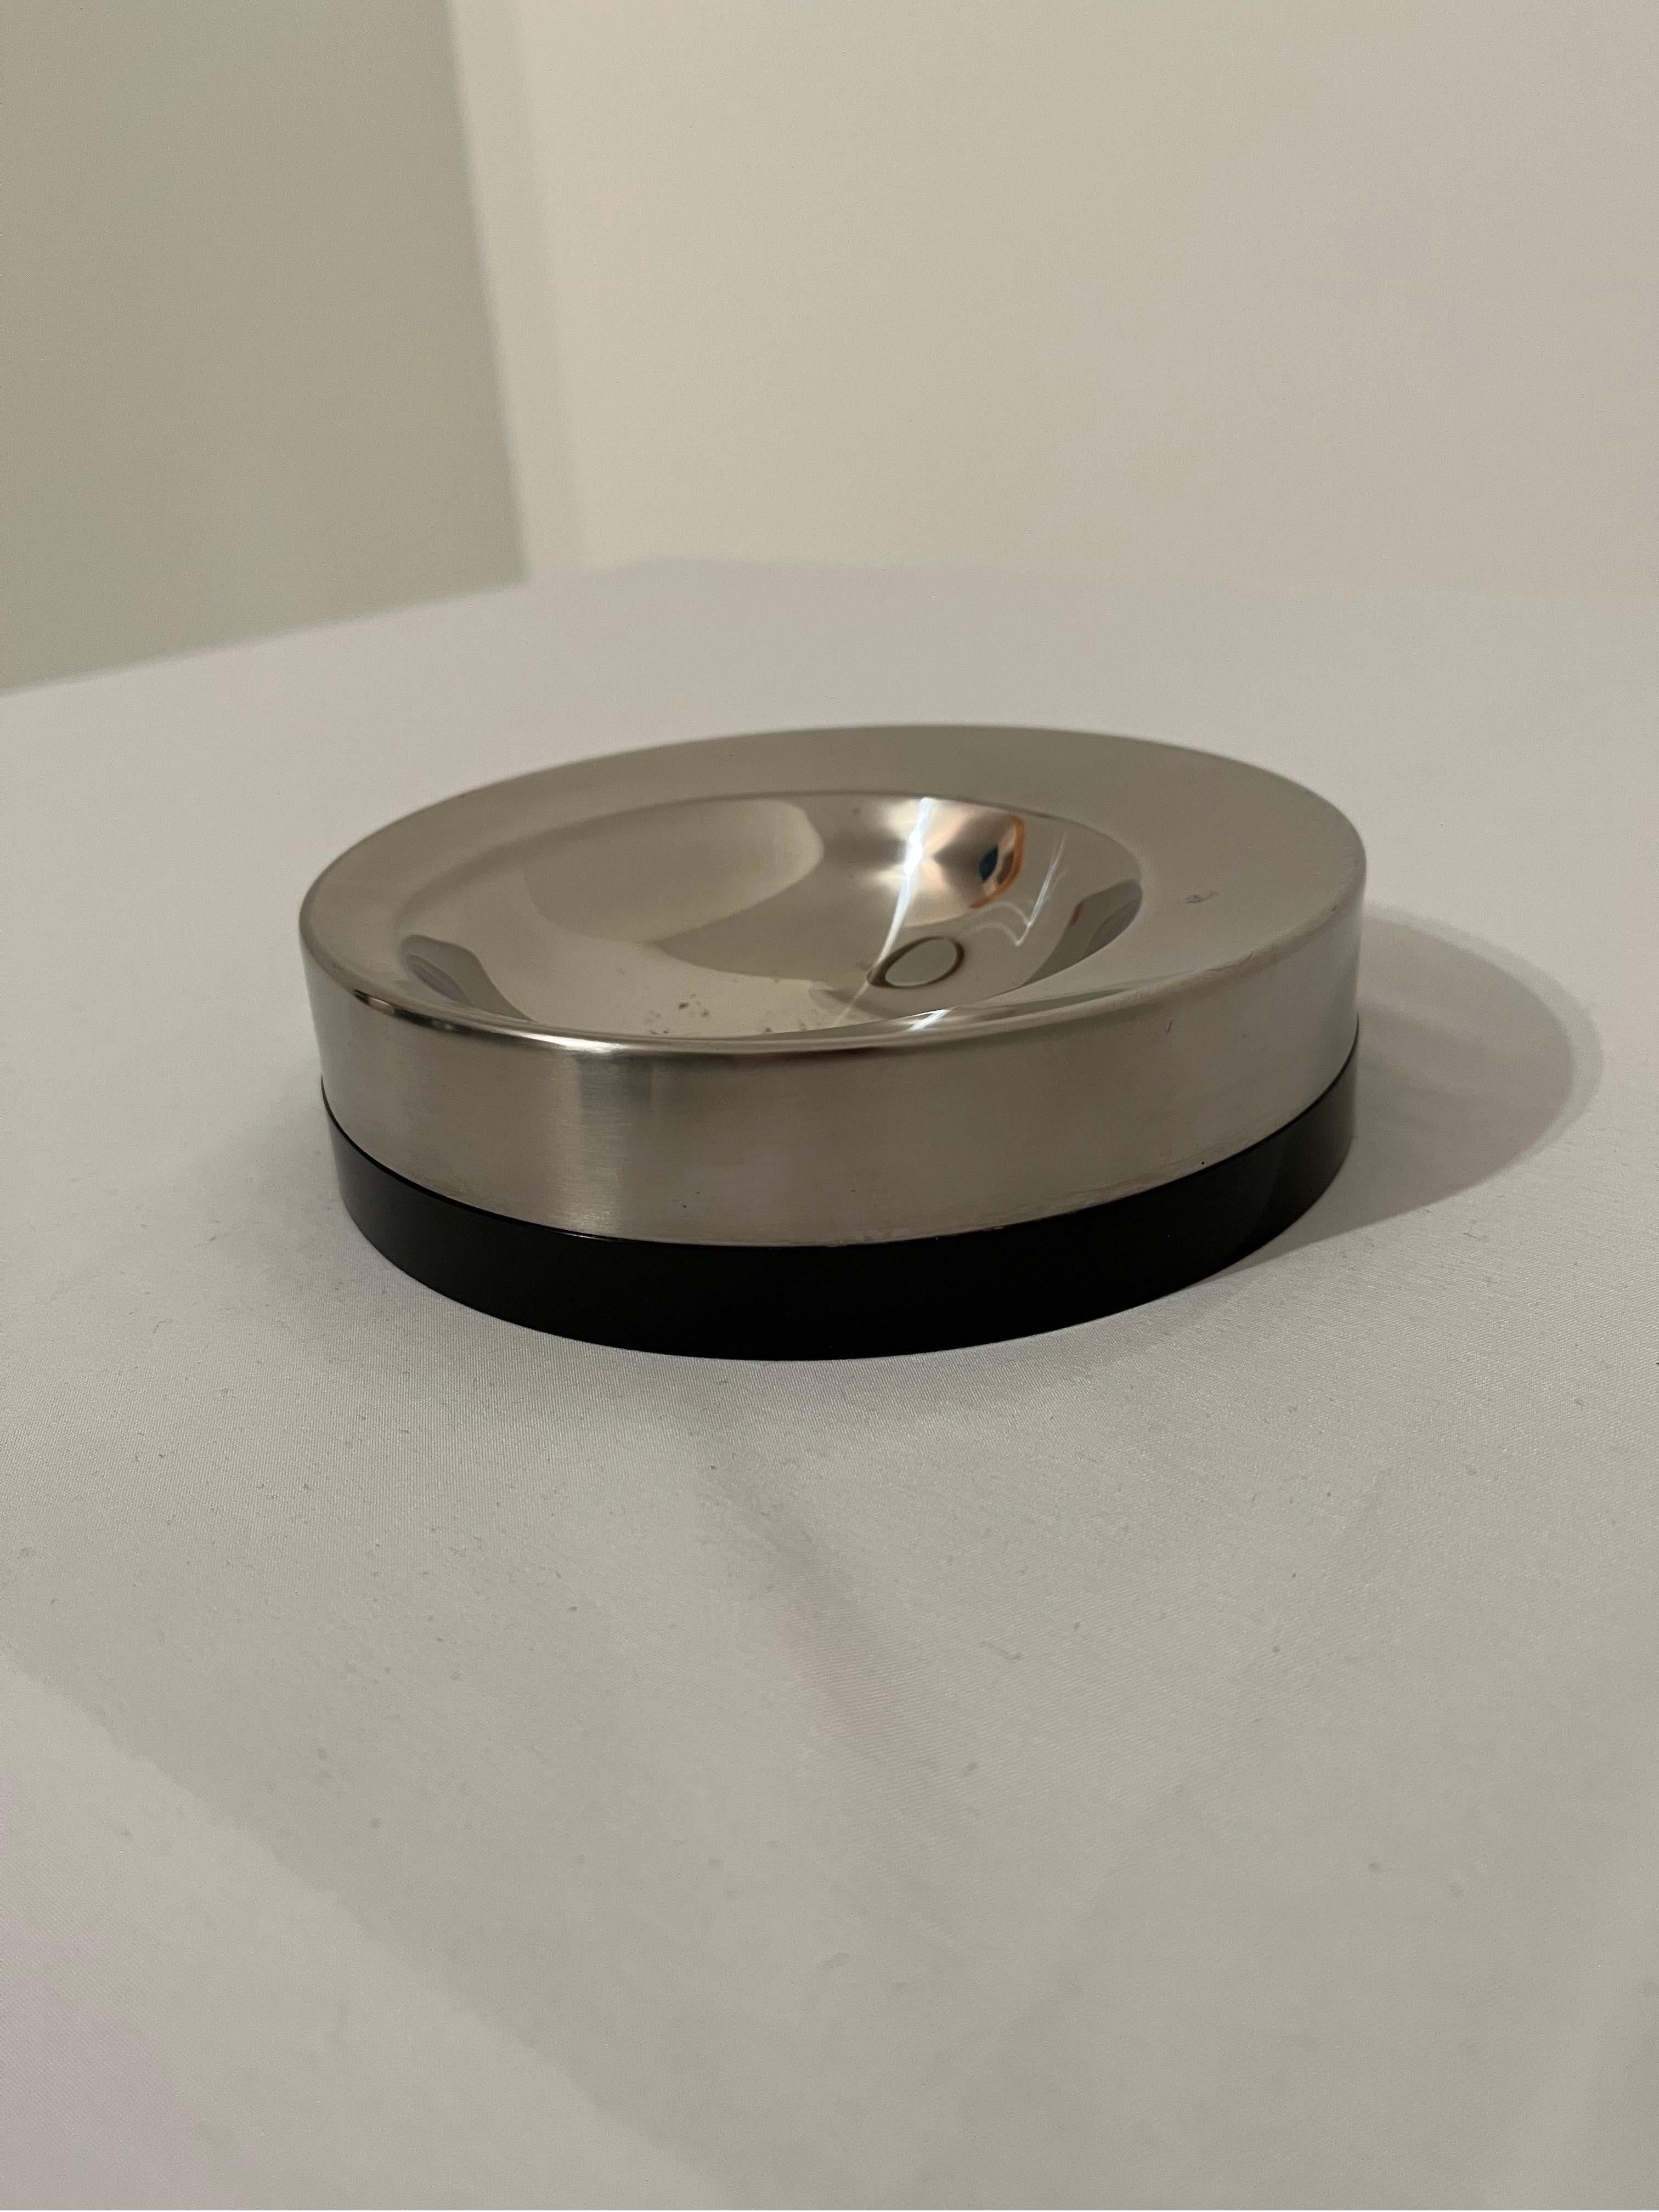 Robert Welch Melamine Stainless Steel Ashtray For Old Hall c1960s 1